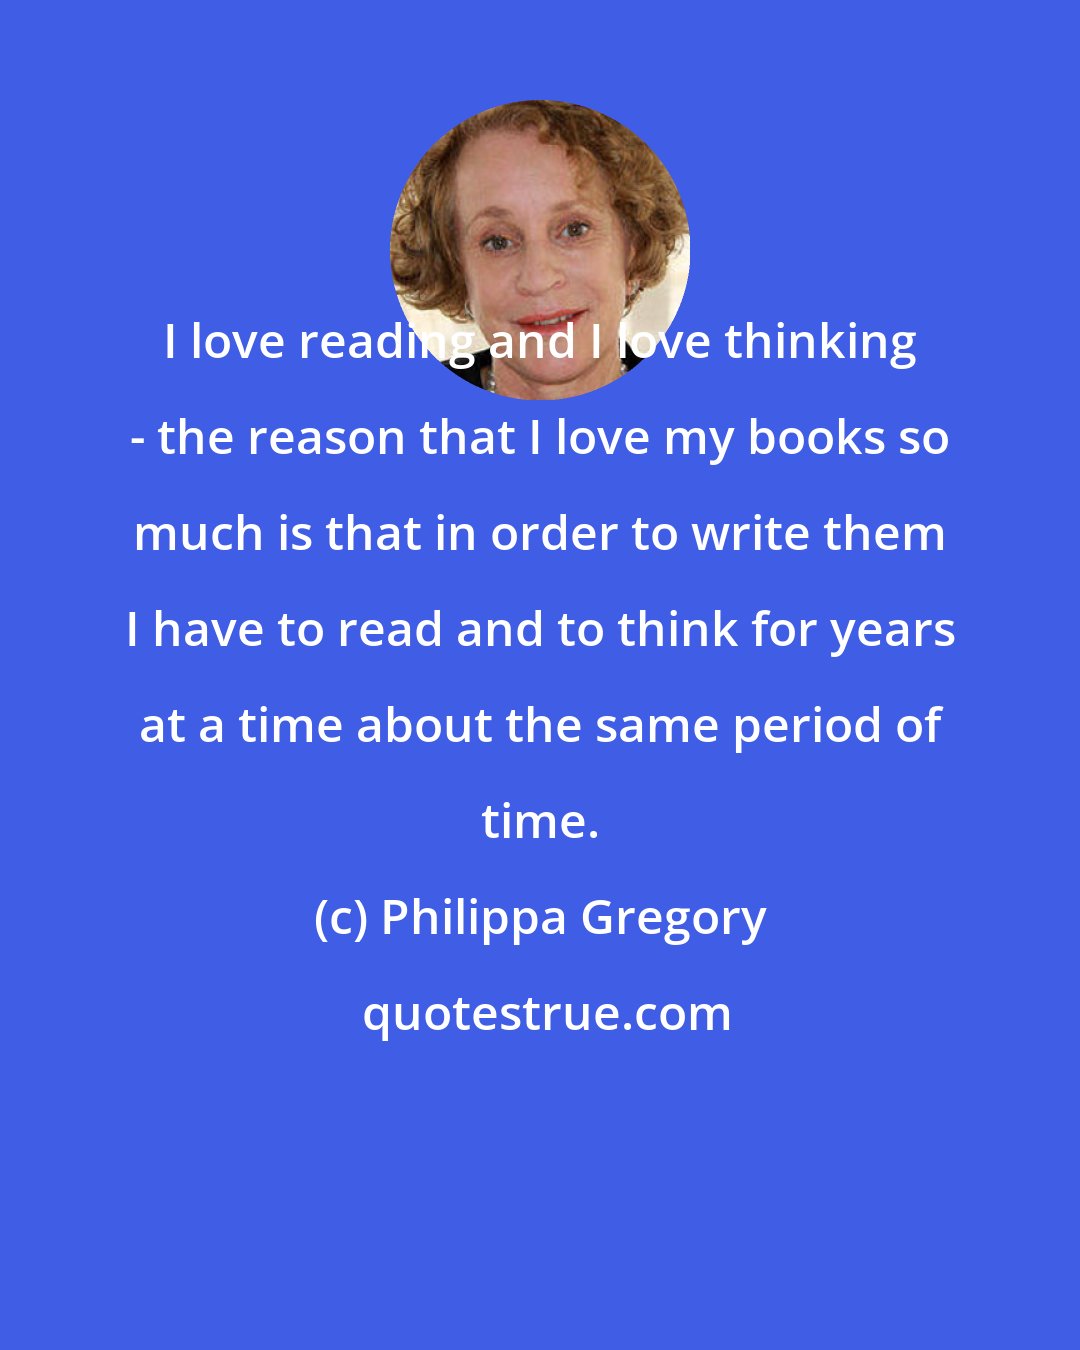 Philippa Gregory: I love reading and I love thinking - the reason that I love my books so much is that in order to write them I have to read and to think for years at a time about the same period of time.